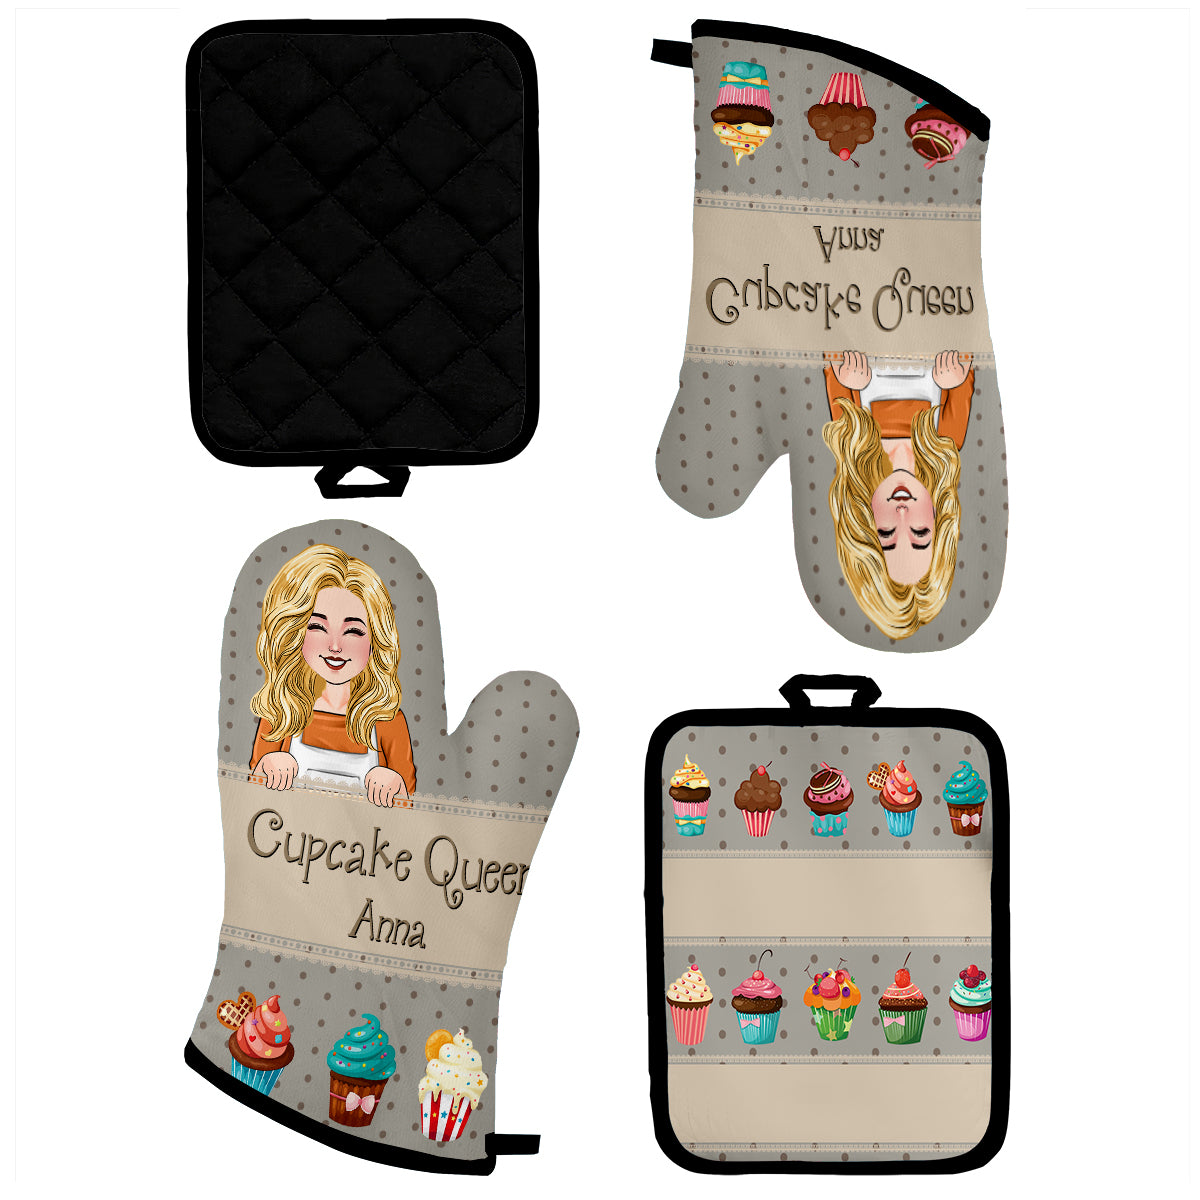 Let's Cook Oven Mitts And Potholder Set